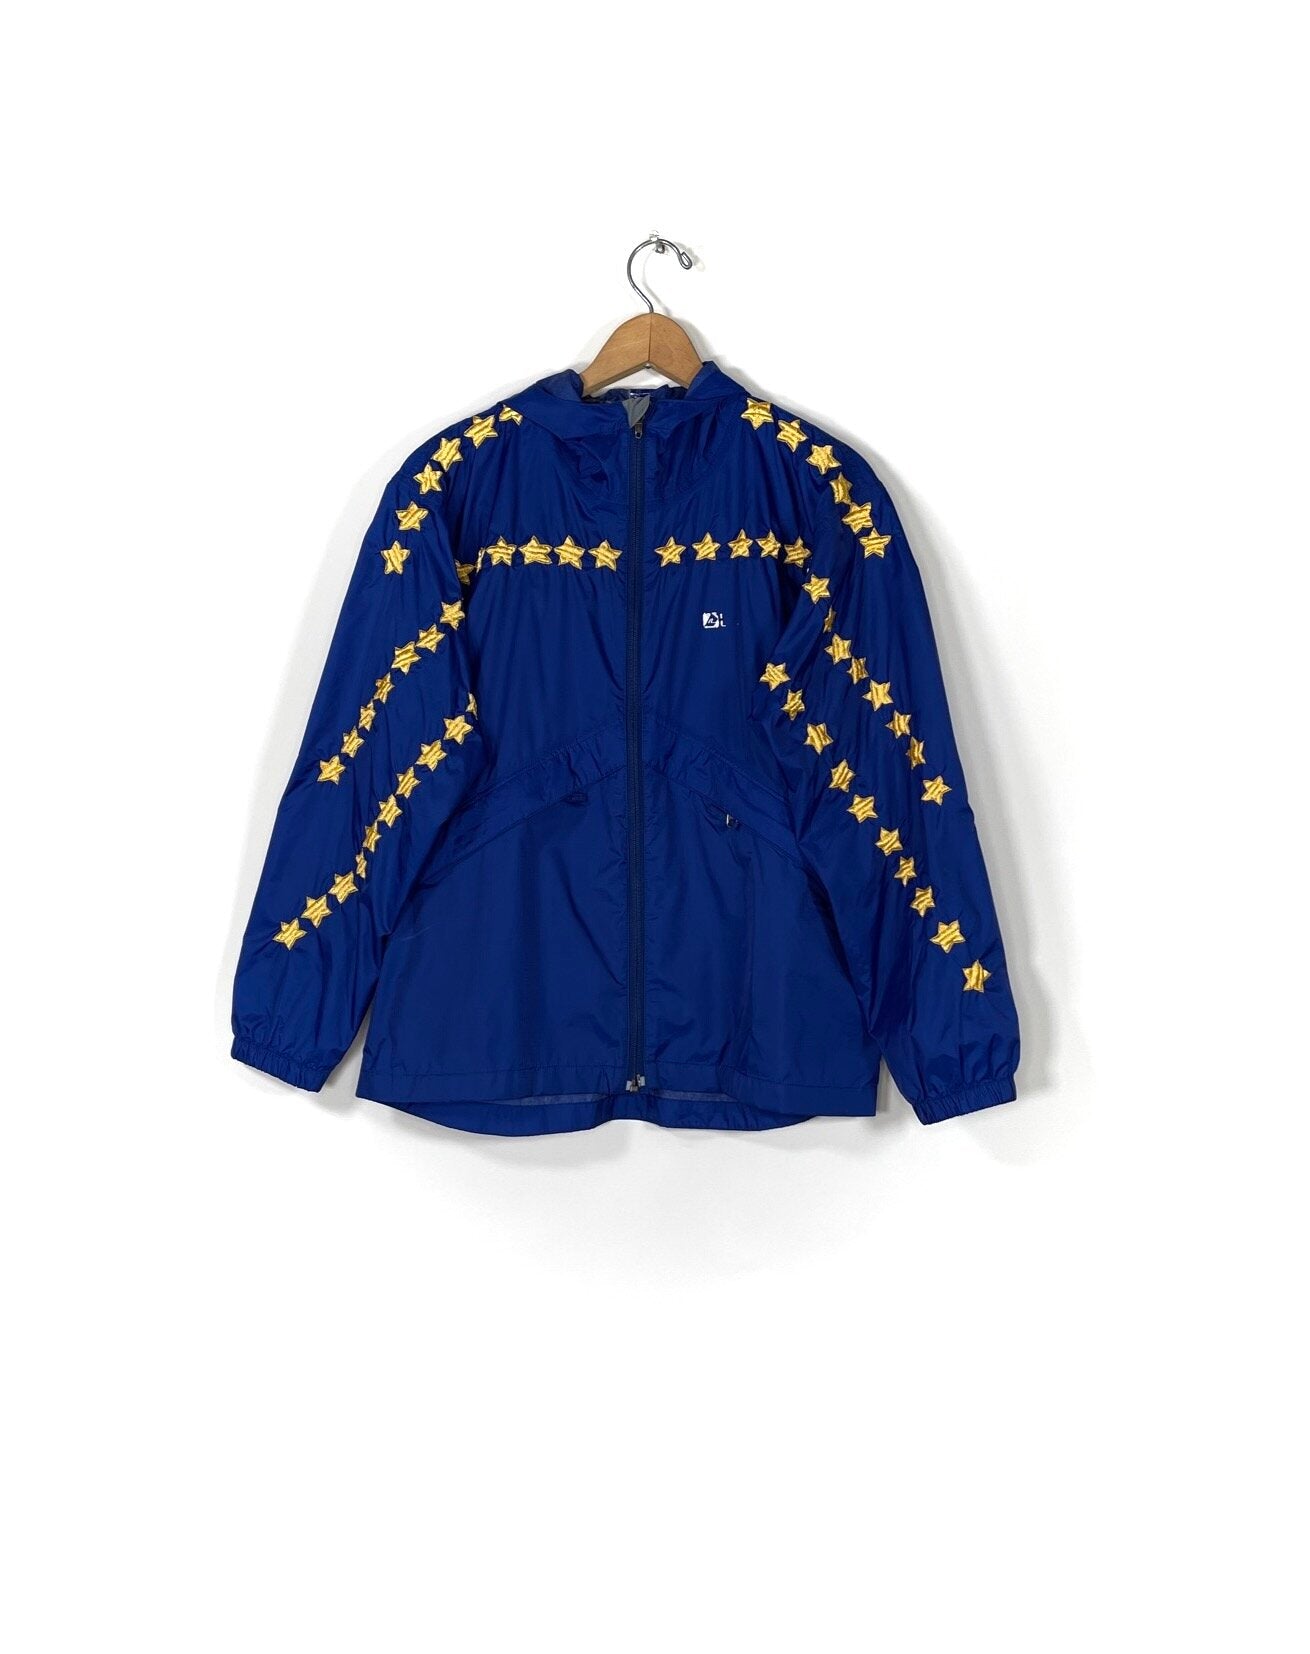 "Leader of the Pack" Track Jacket - Blue/Yellow